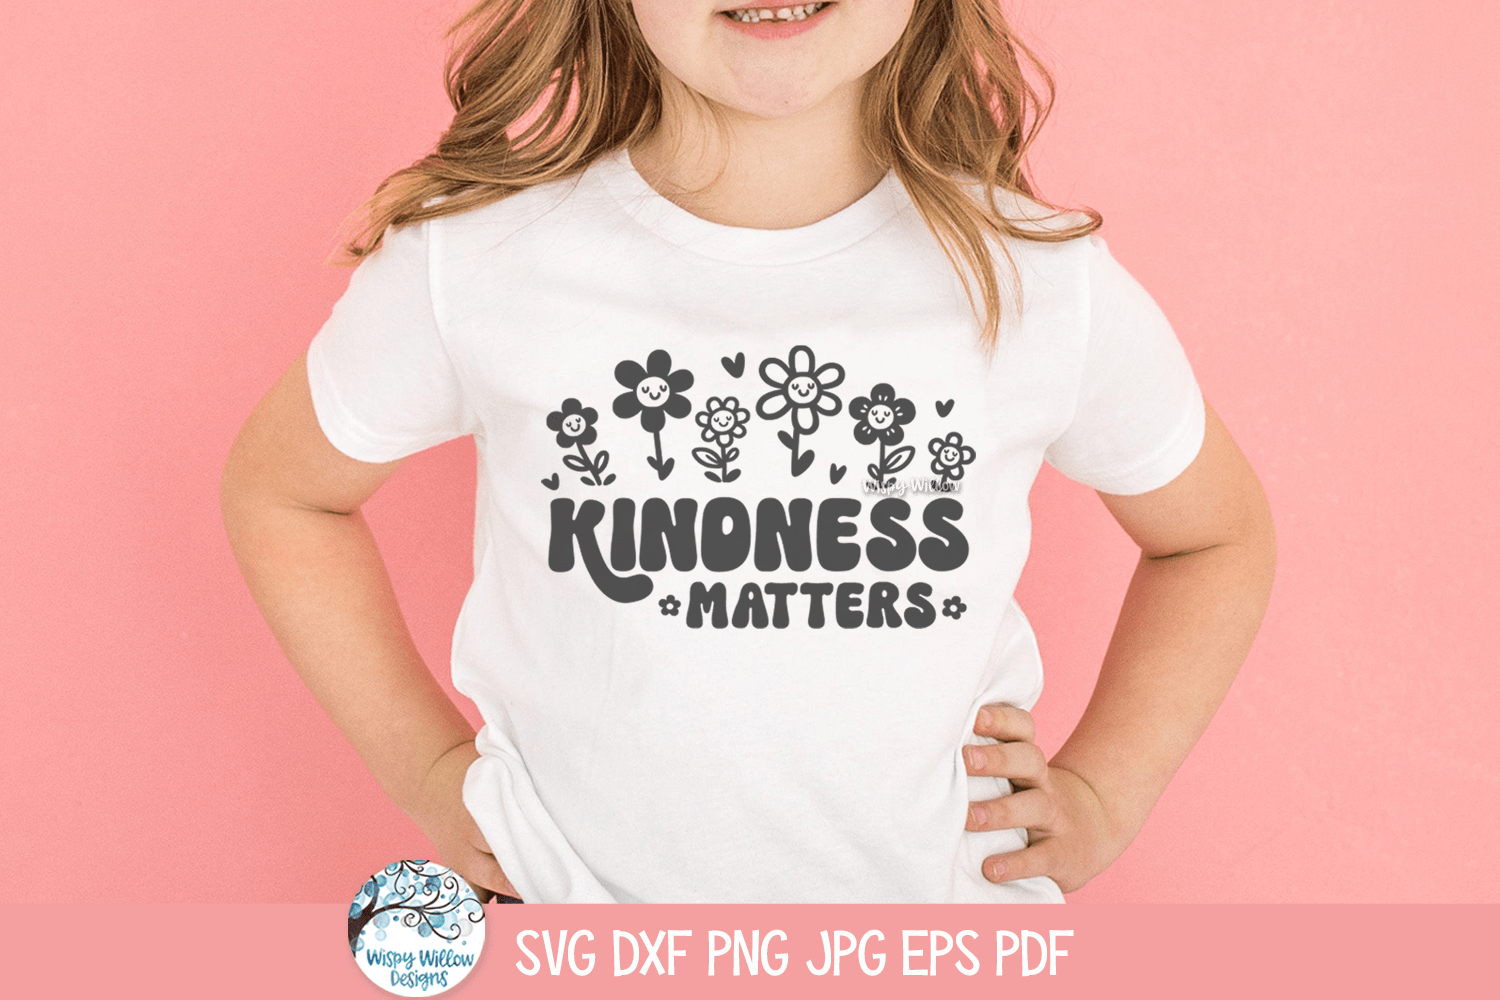 Kindness Matters SVG | Empowering Kindness Advocacy Design Wispy Willow Designs Company